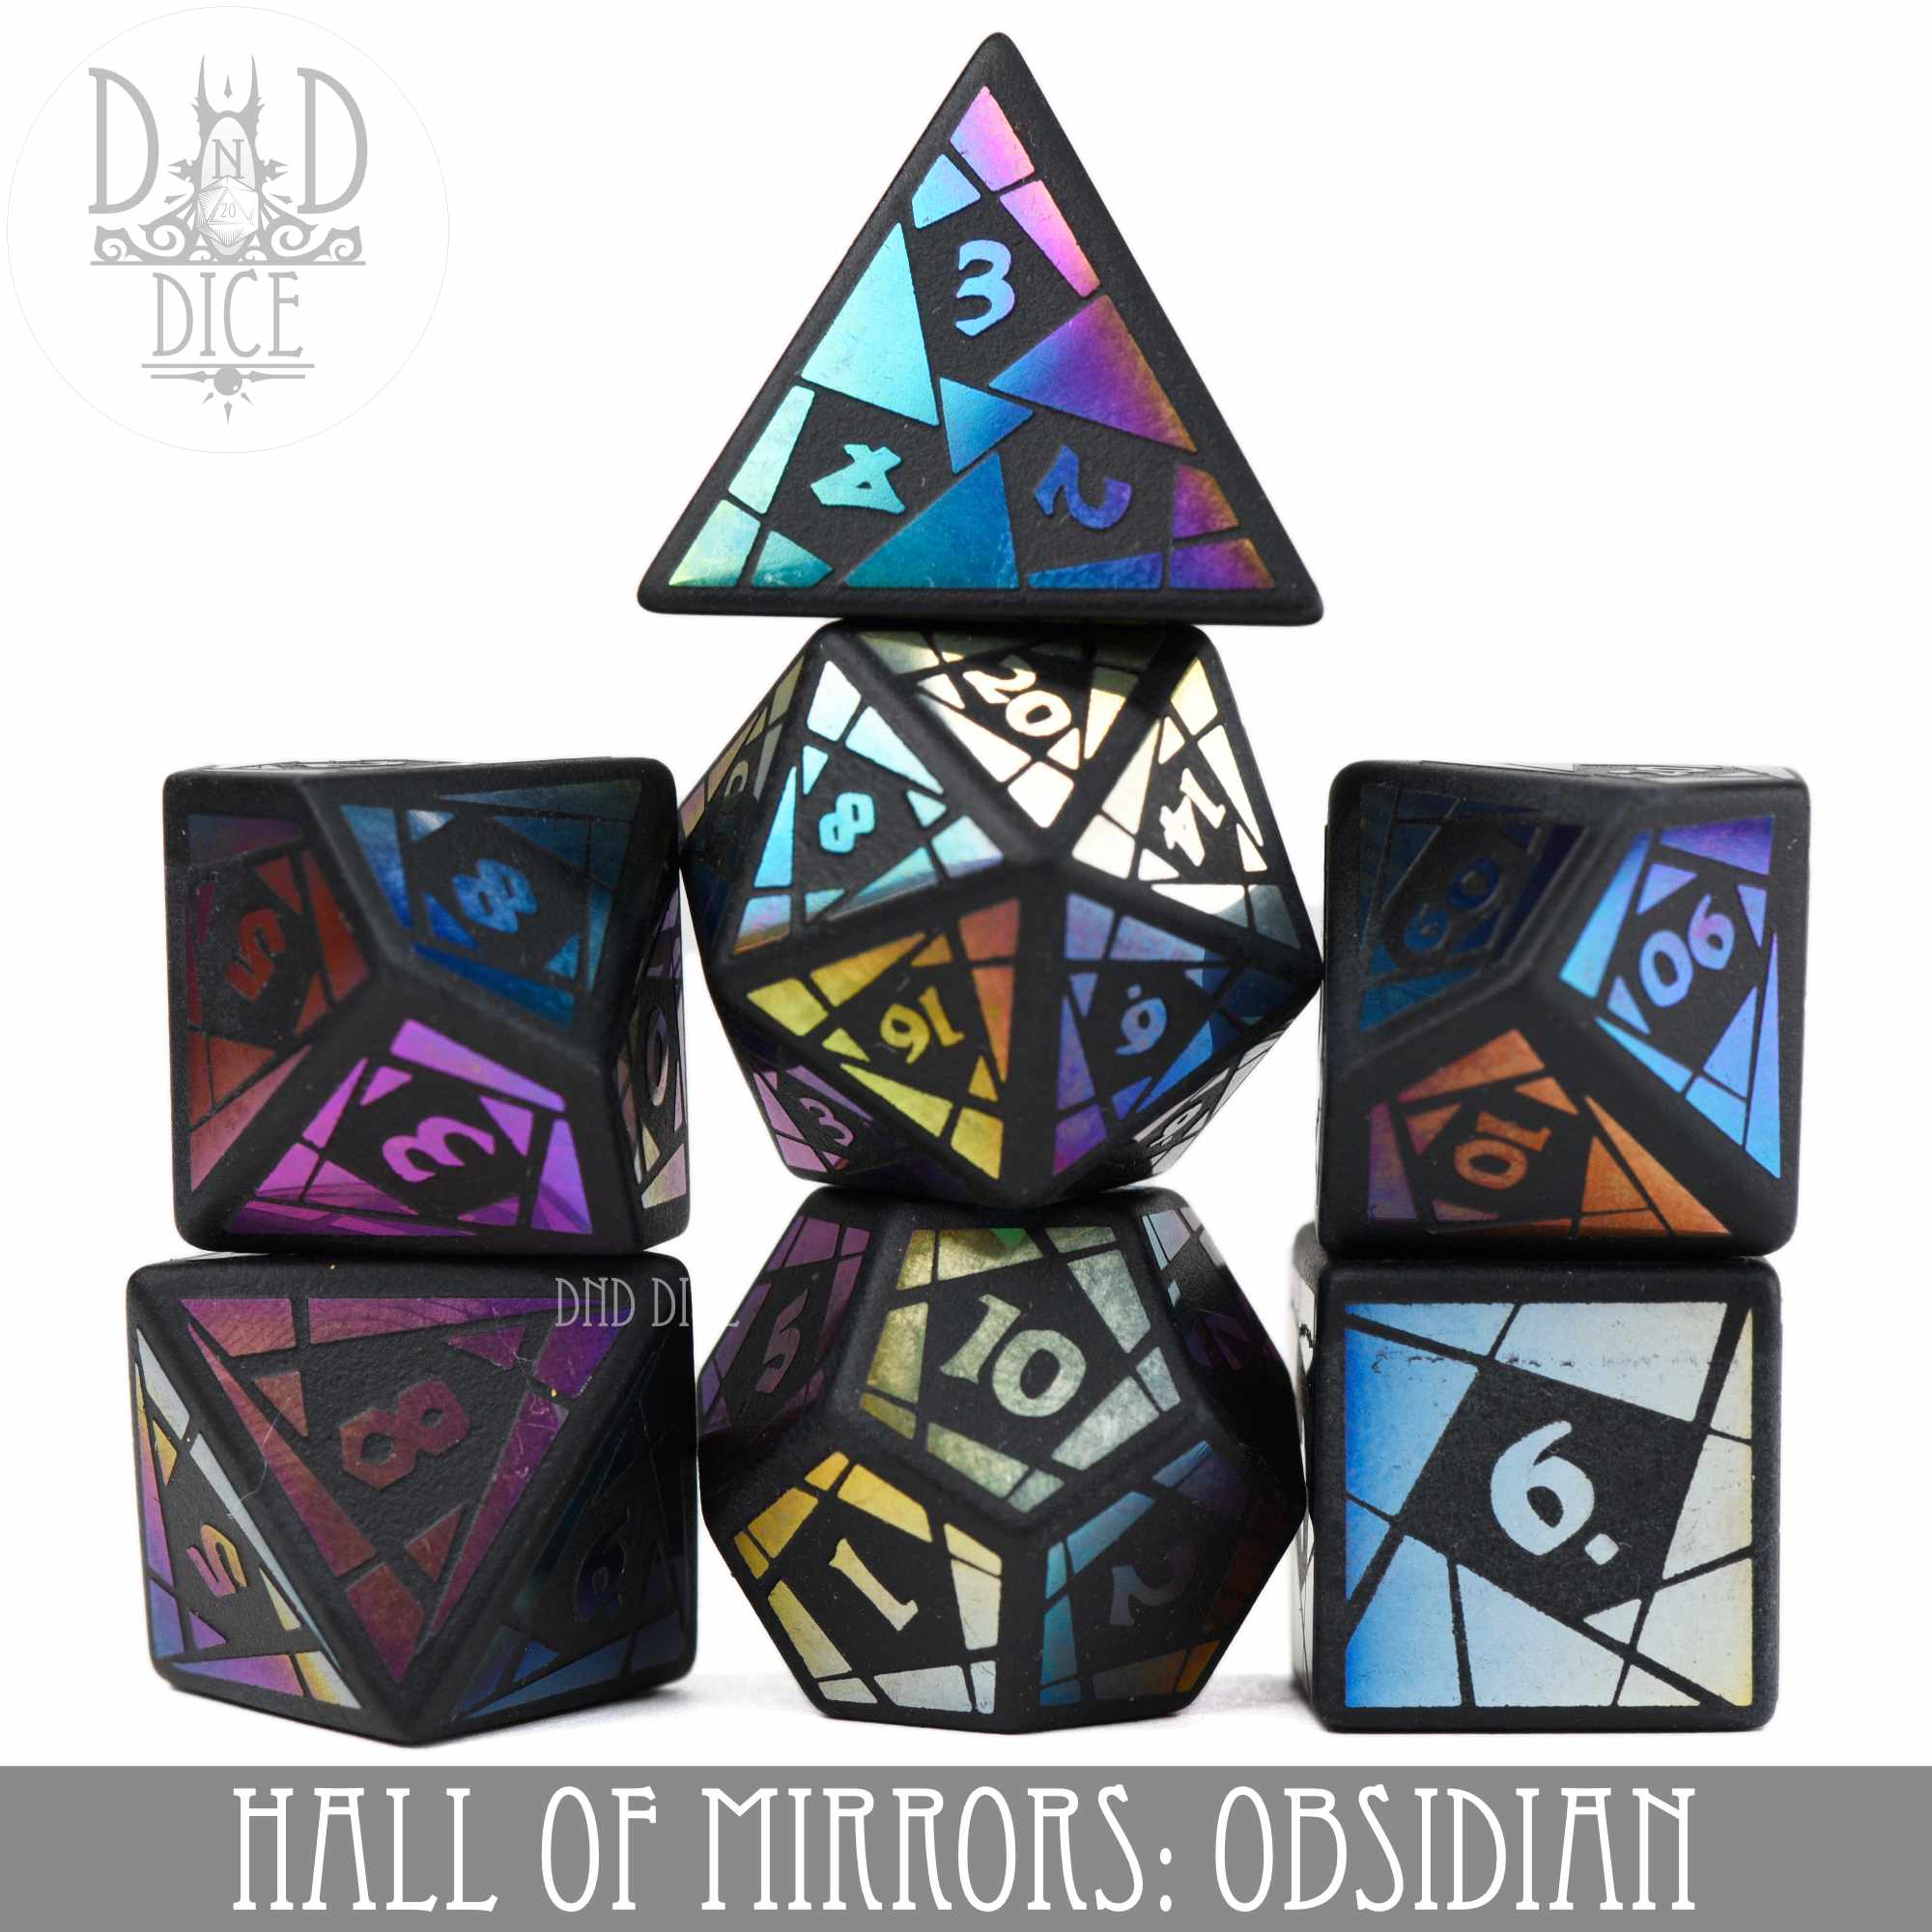 Hall of Mirrors: Obsidian Dice Set (Gift Box)